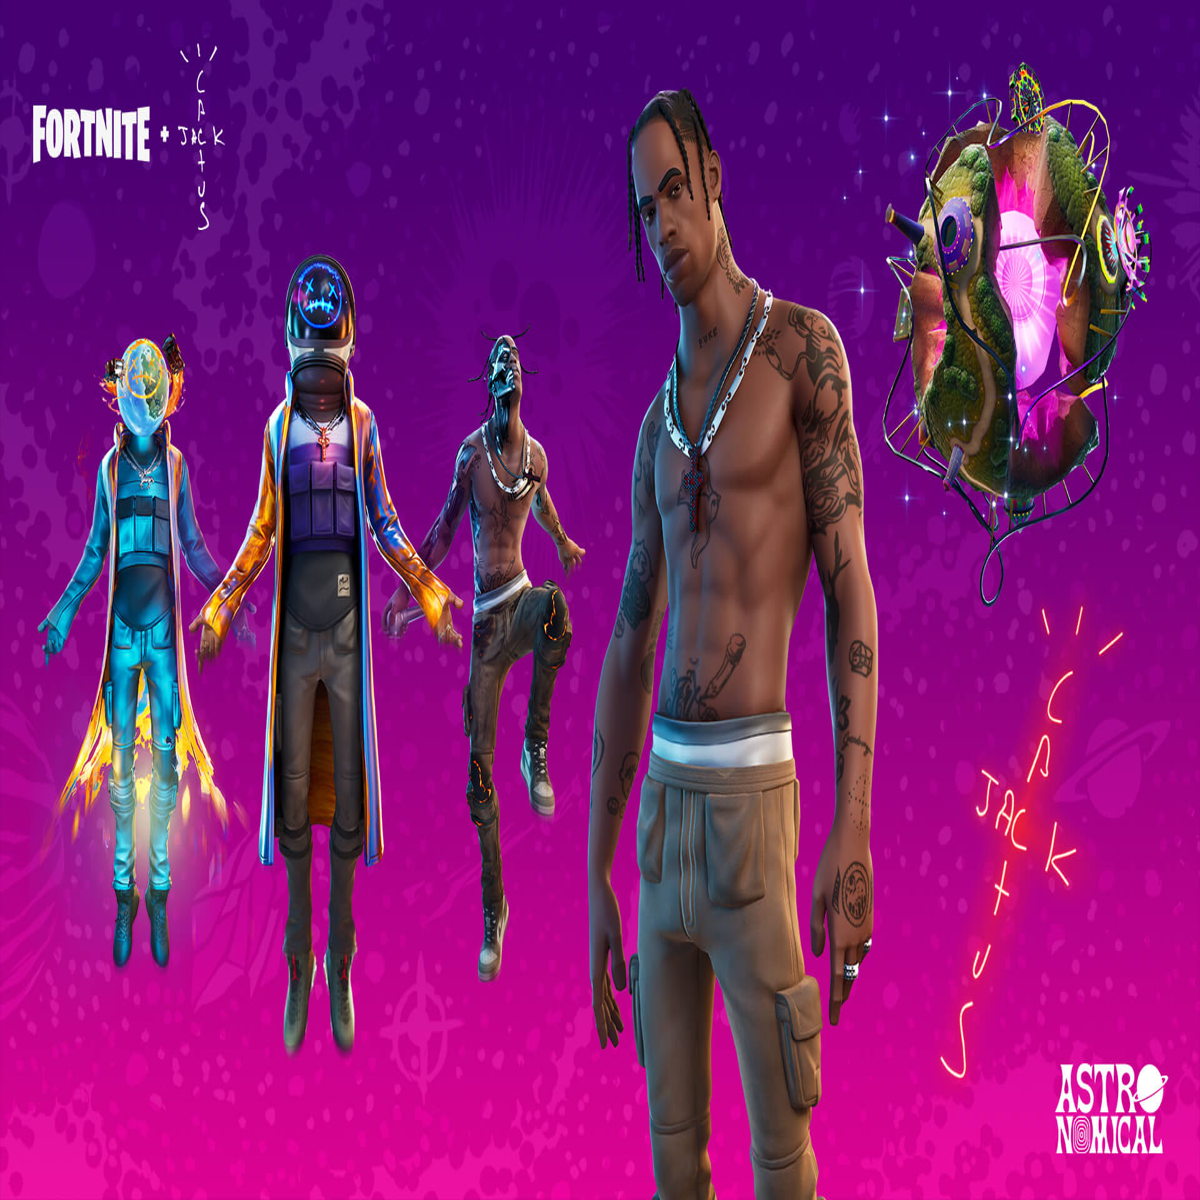 Travis Scott reportedly grossed roughly $20m for Fortnite concert